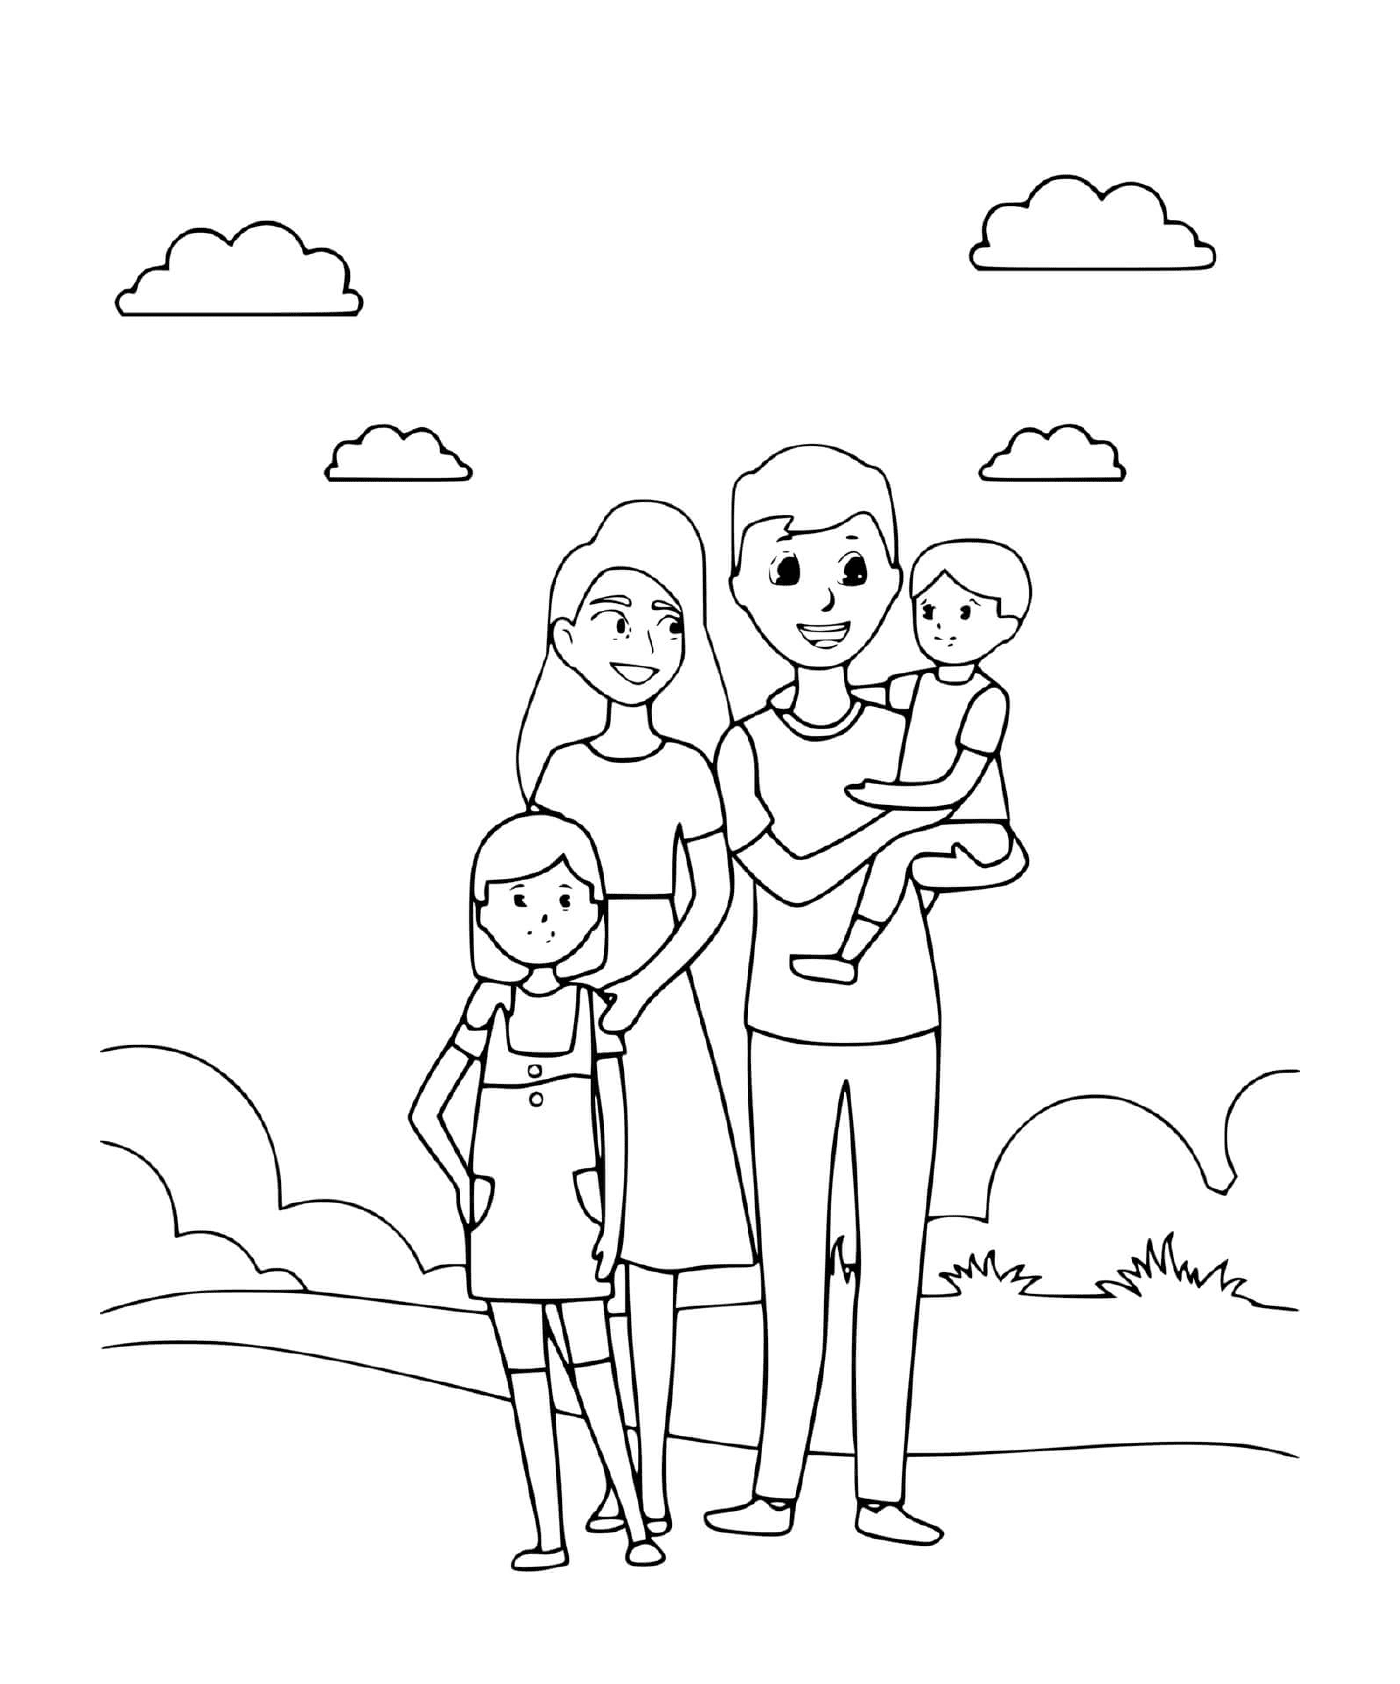  A beautiful family on holiday 